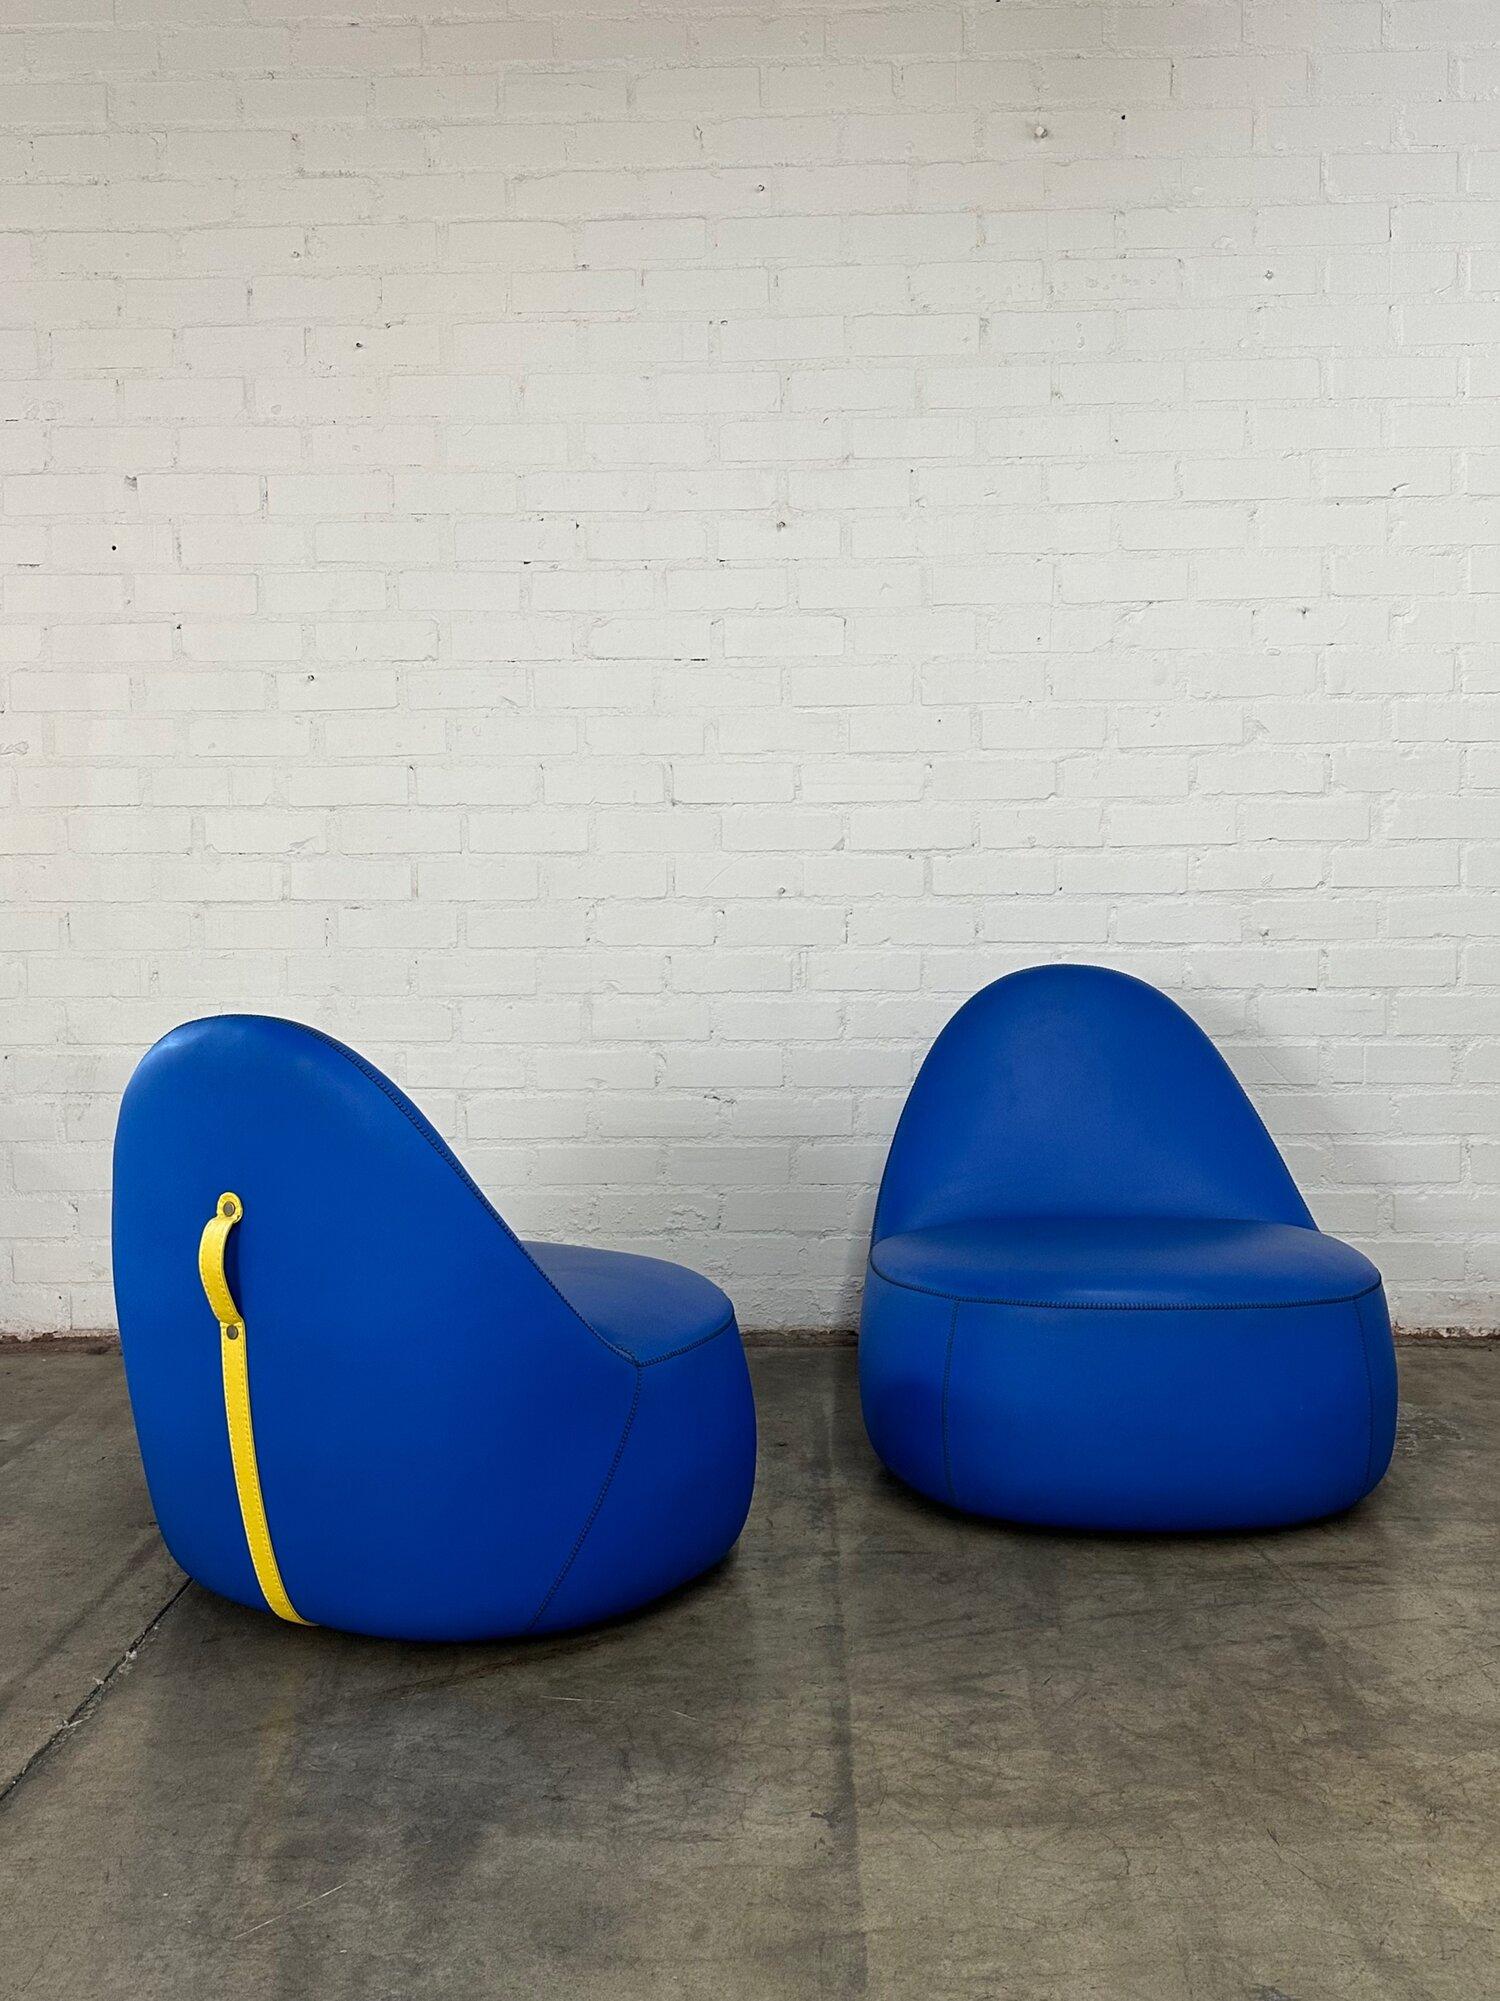 American Mitt Lounge Chairs in Blue with Yellow Accents by Claudia + Harry Washington, Be For Sale